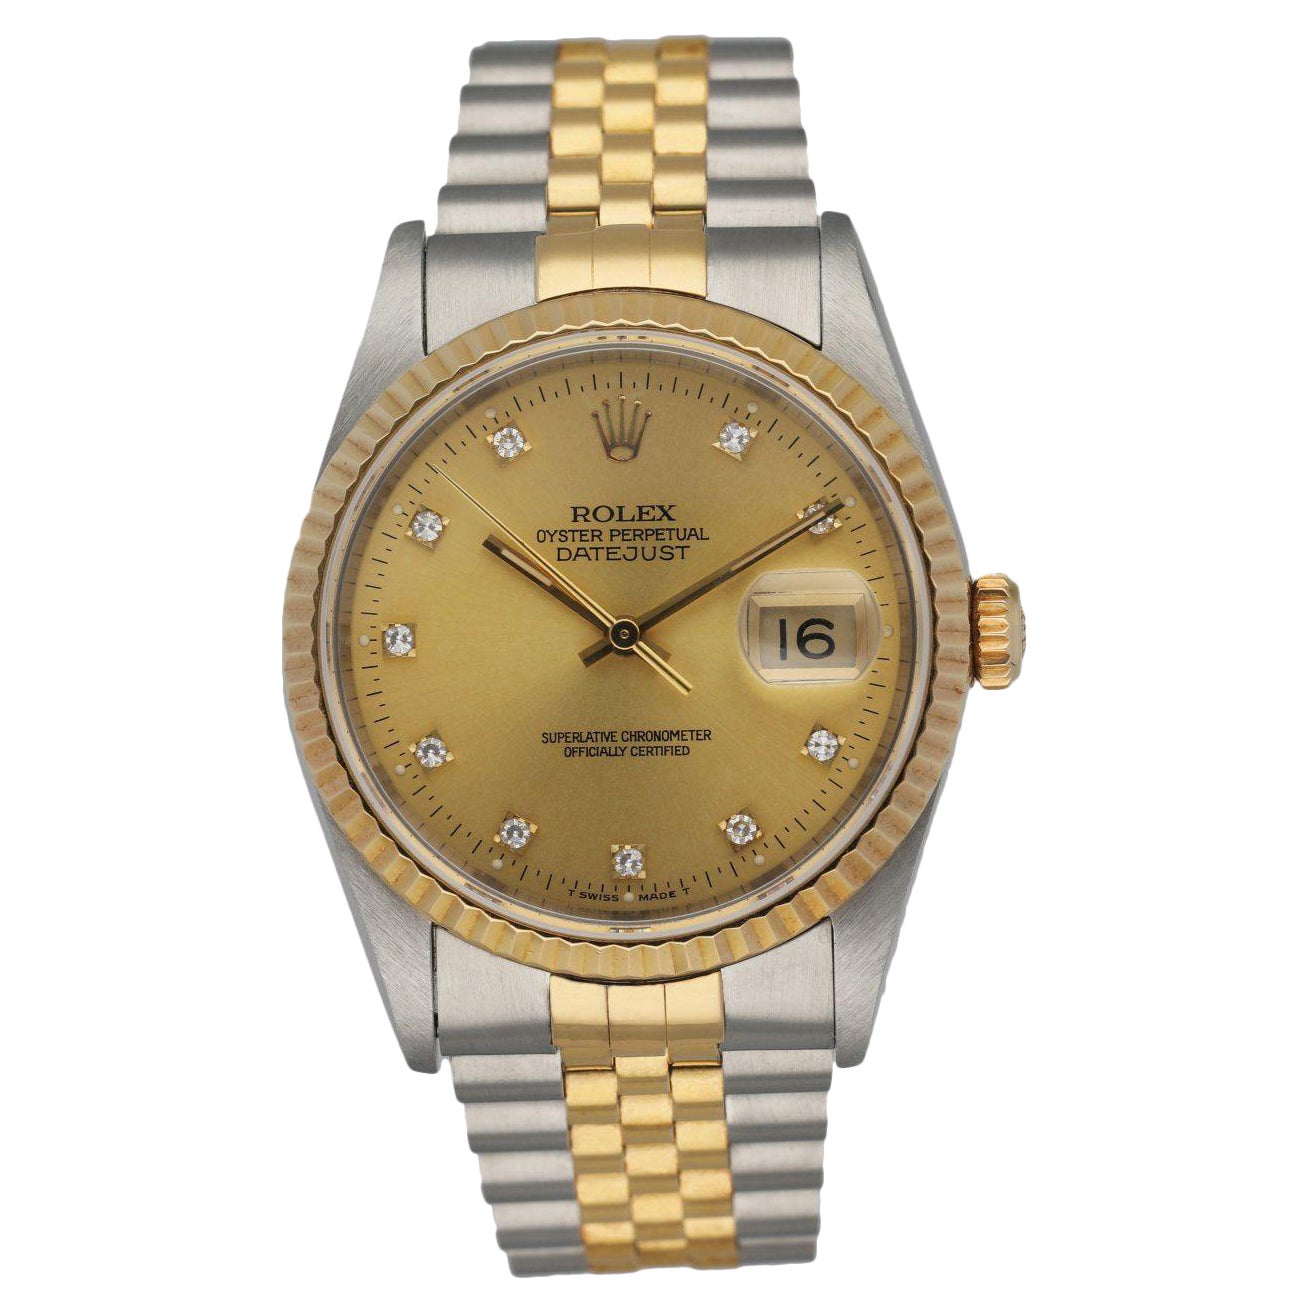 Rolex Oyster Perpetual Datejust 16233 Pyramid Dial Men's Watch For Sale ...